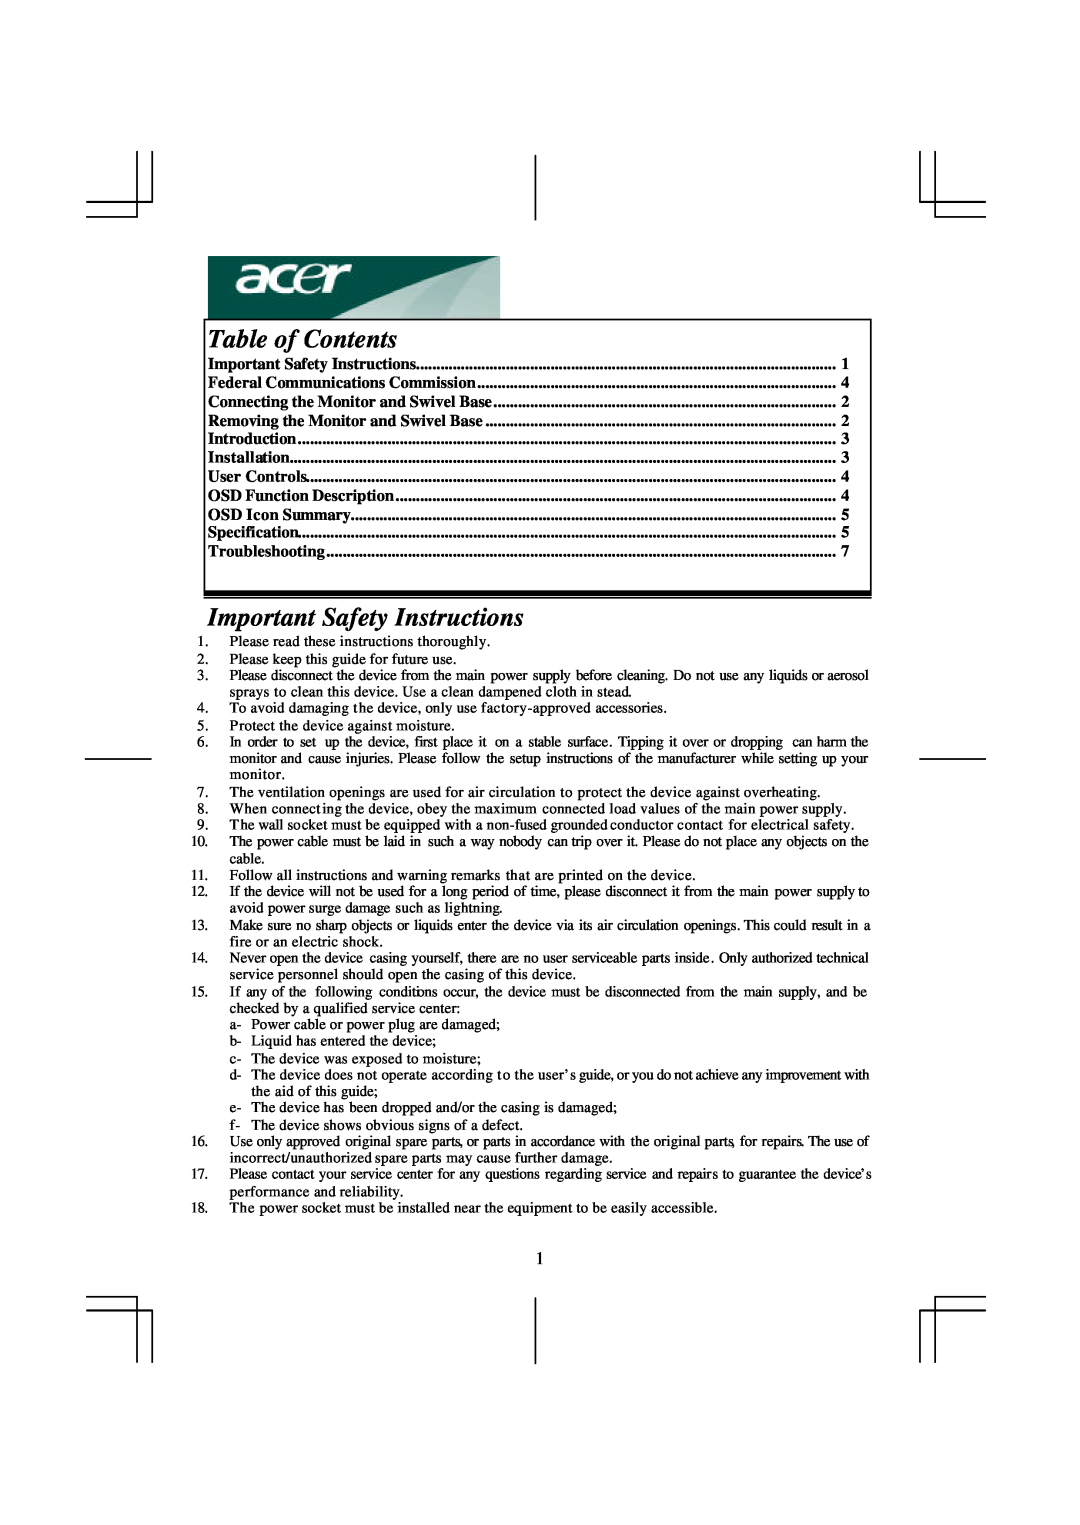 Acer AC 711 important safety instructions Table of Contents, Important Safety Instructions, Introduction, Installation 